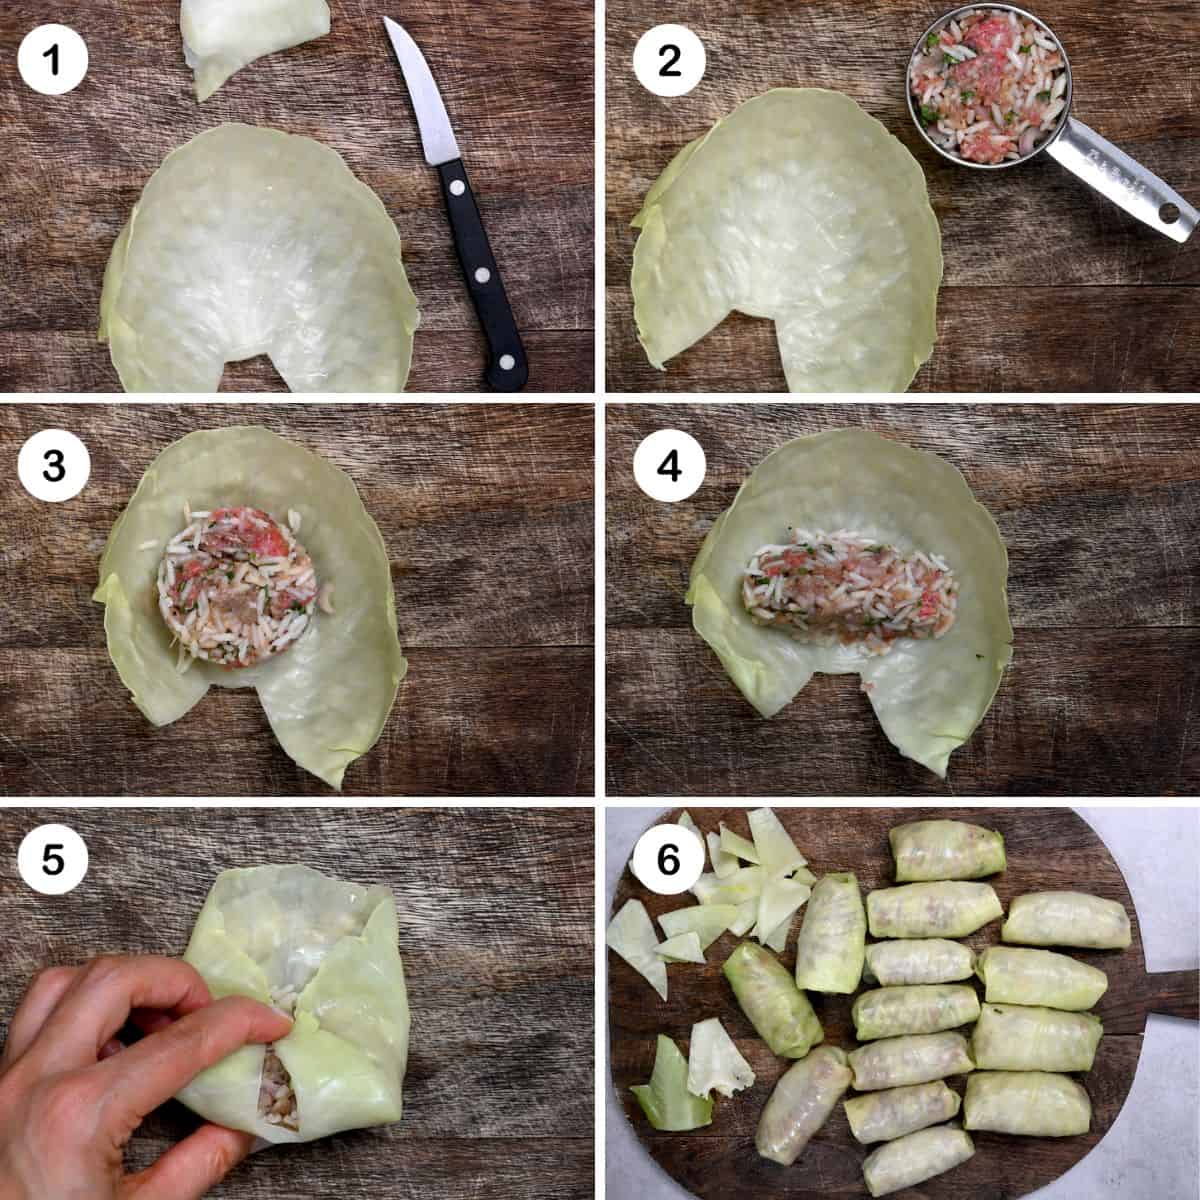 Steps for stuffing cabbage rolls